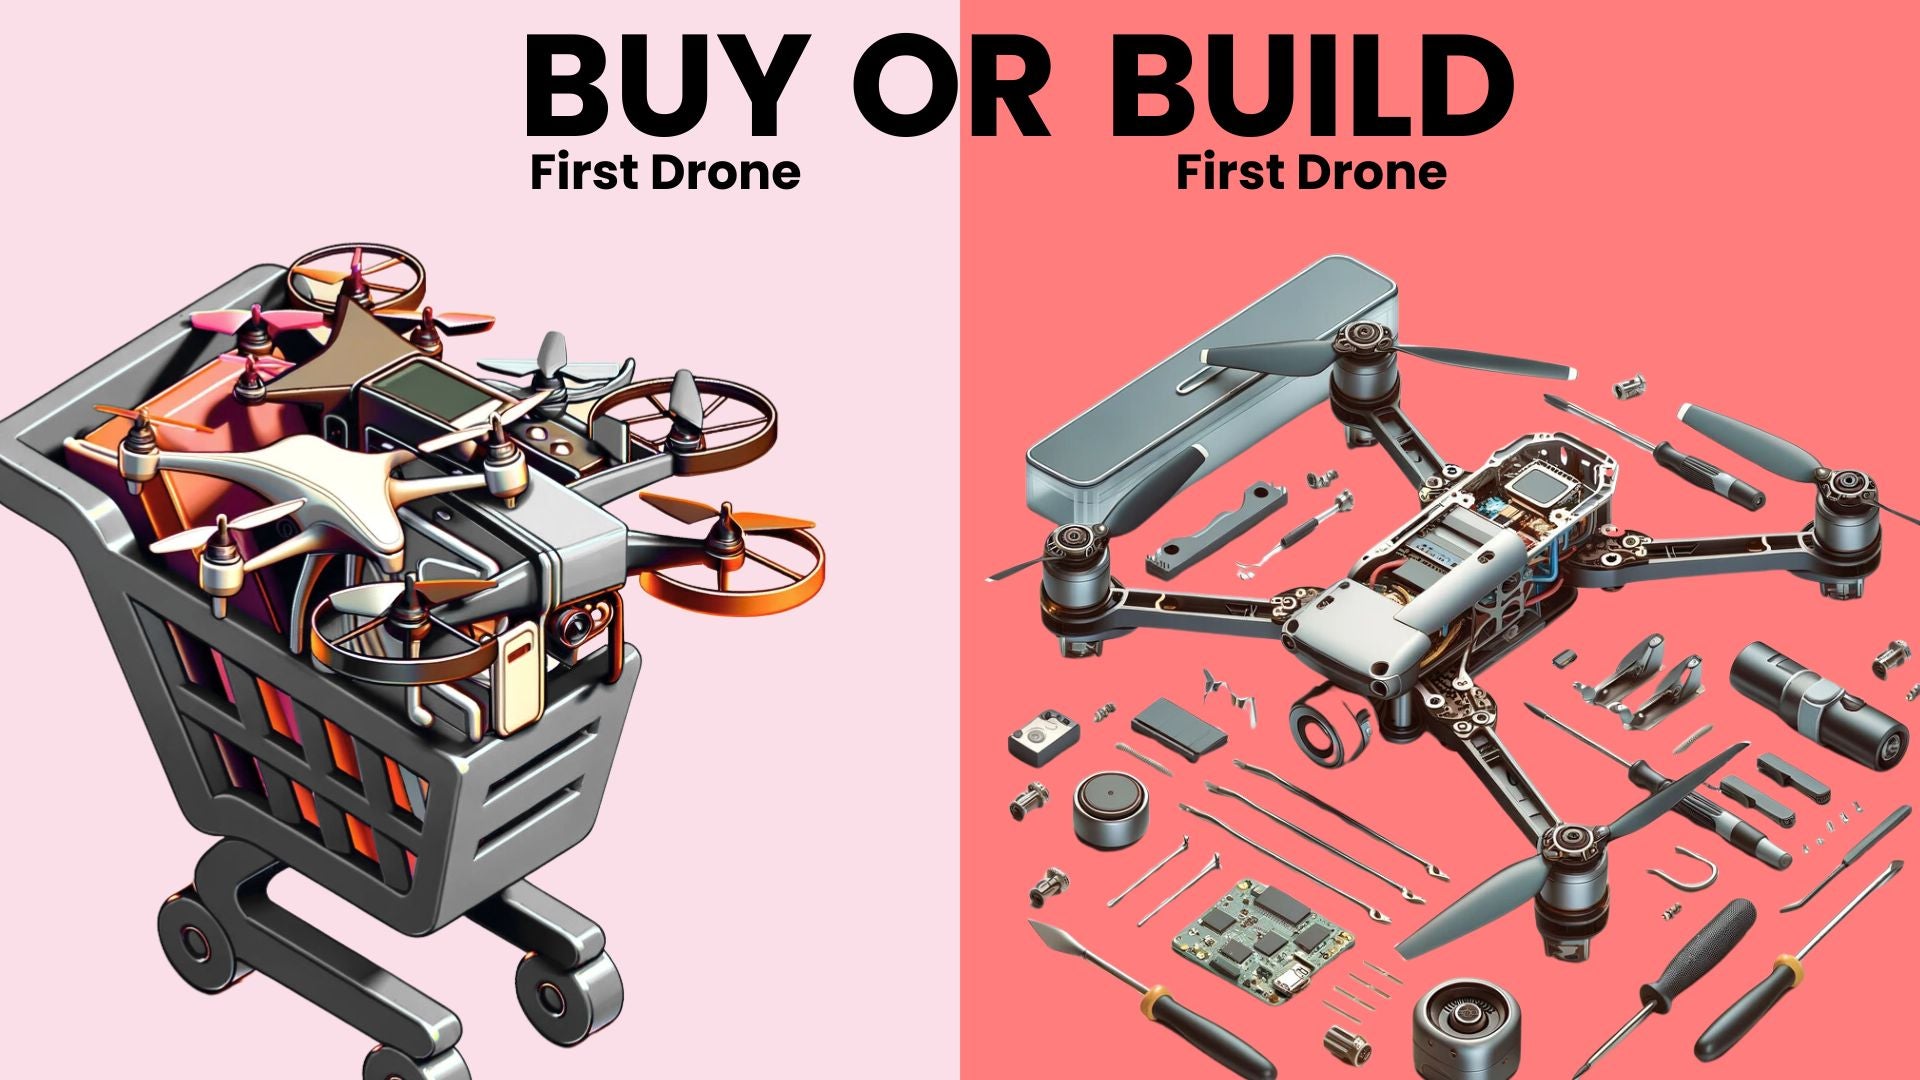 Should you build or buy your first drone?